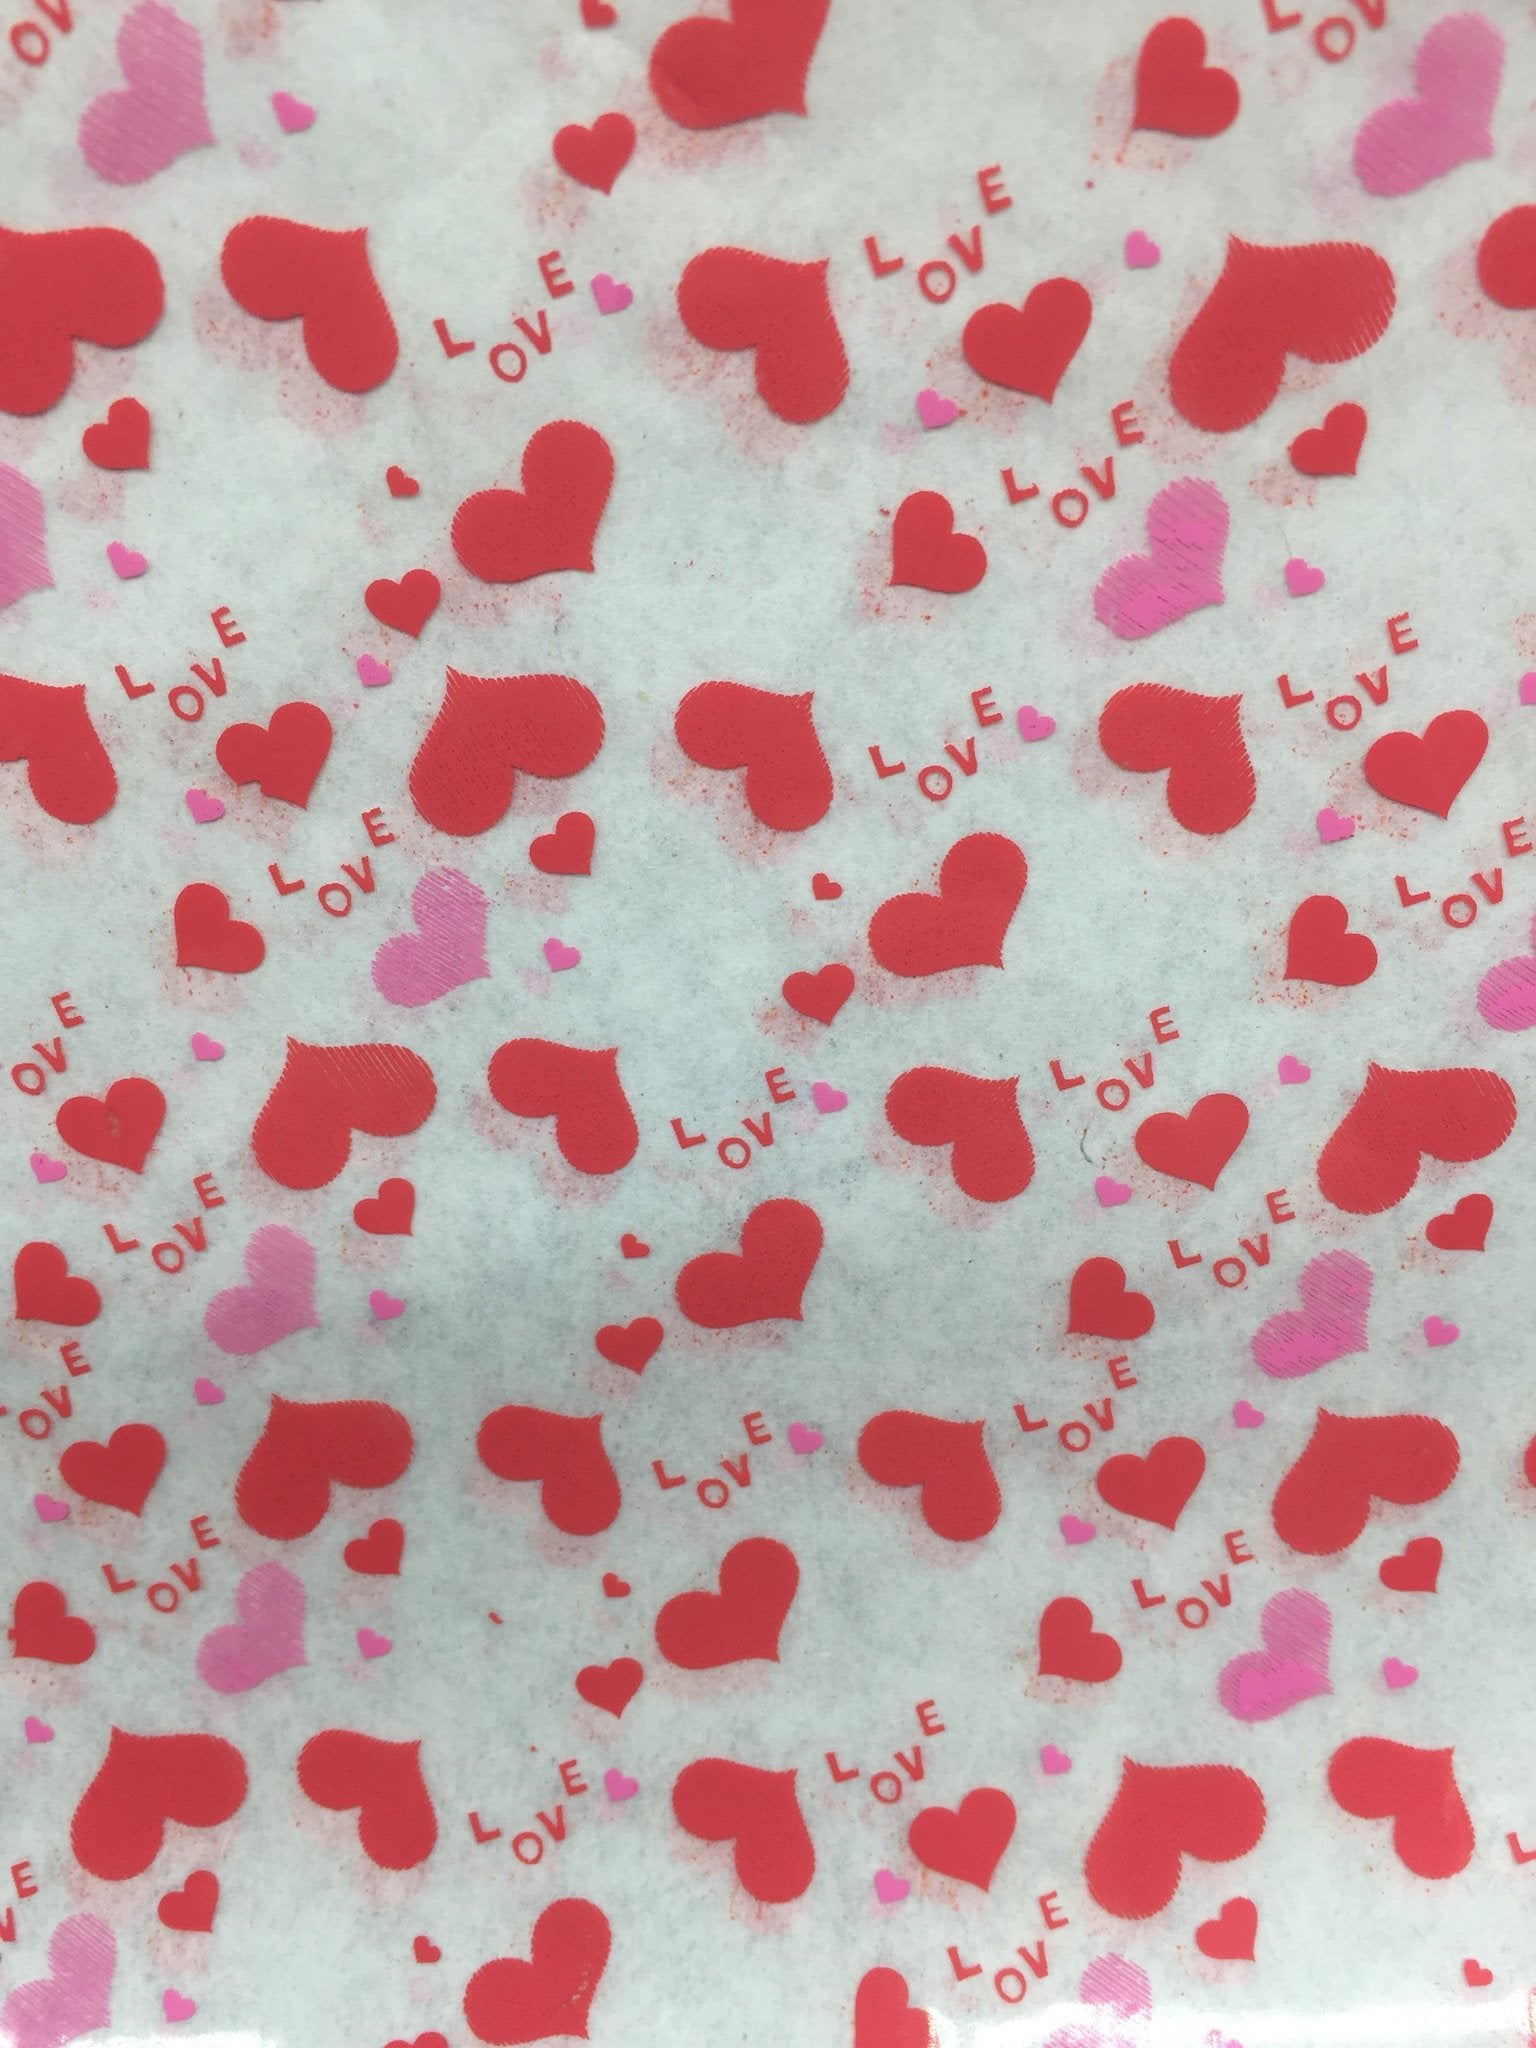 783007 Chocolate Transfer Sheets - Red Heart Love - Pack of 10 Shee